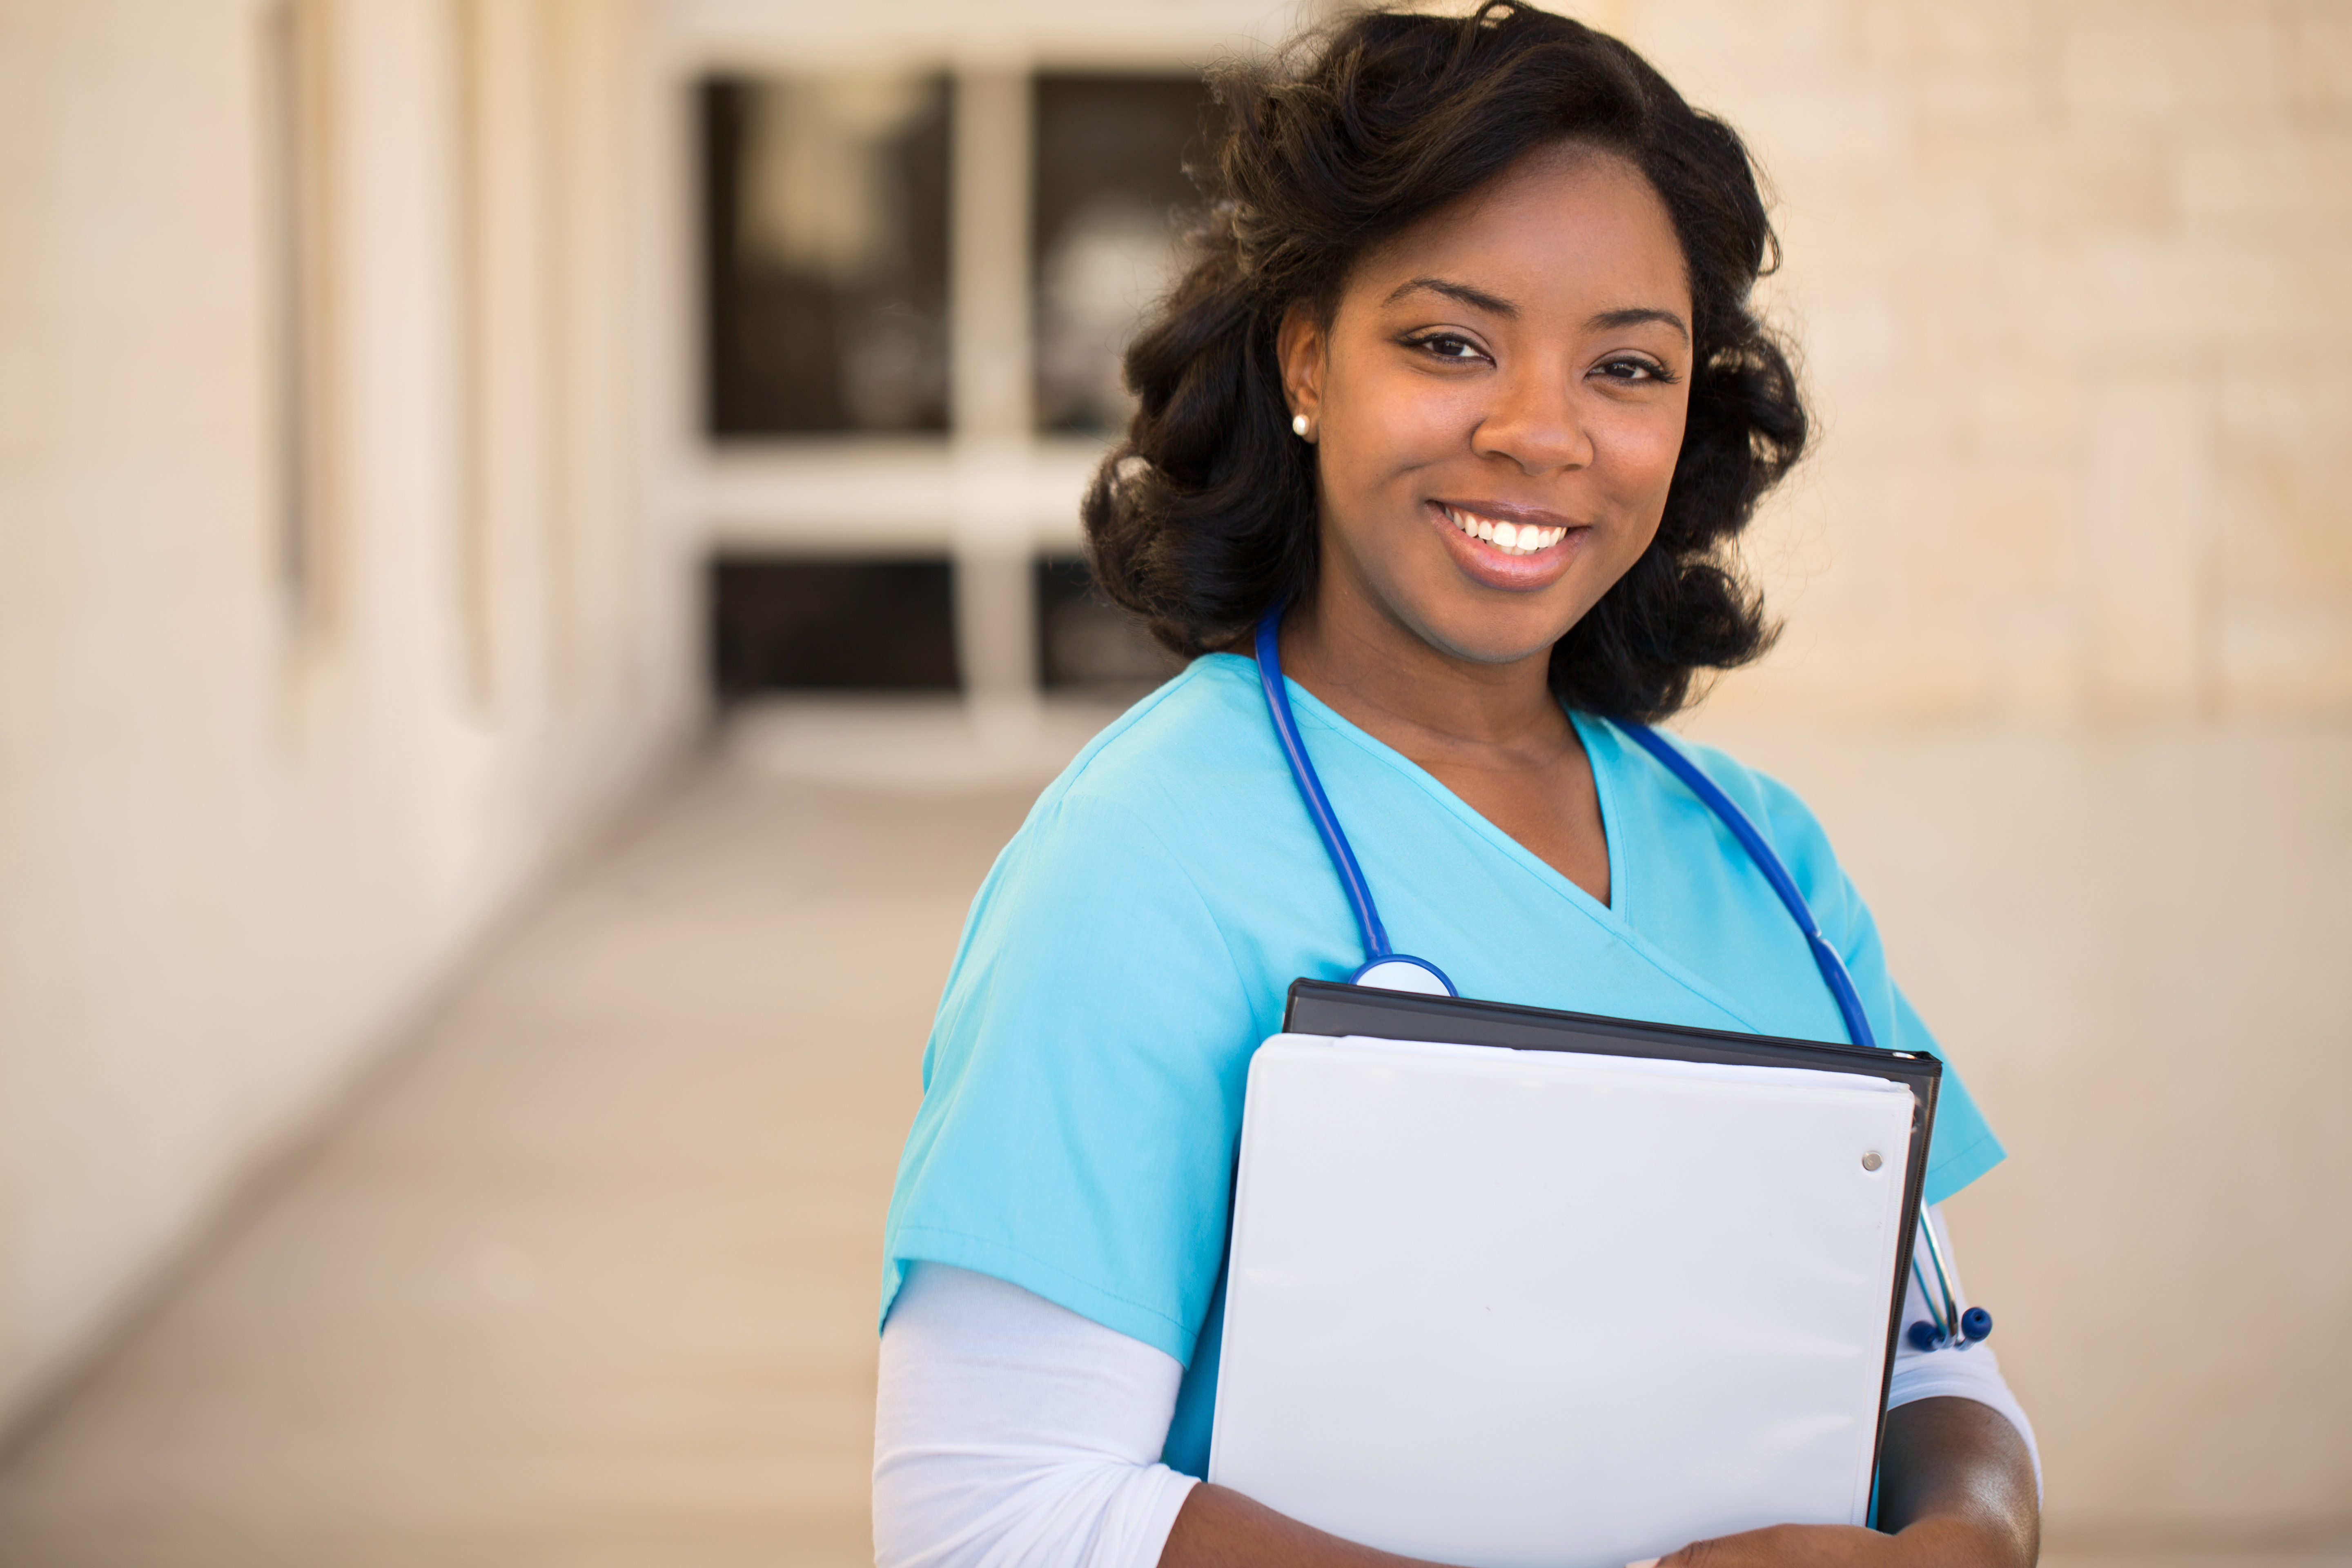 Nurse holding binder of documents smiling at the camera, wearing light blue scrubs. 